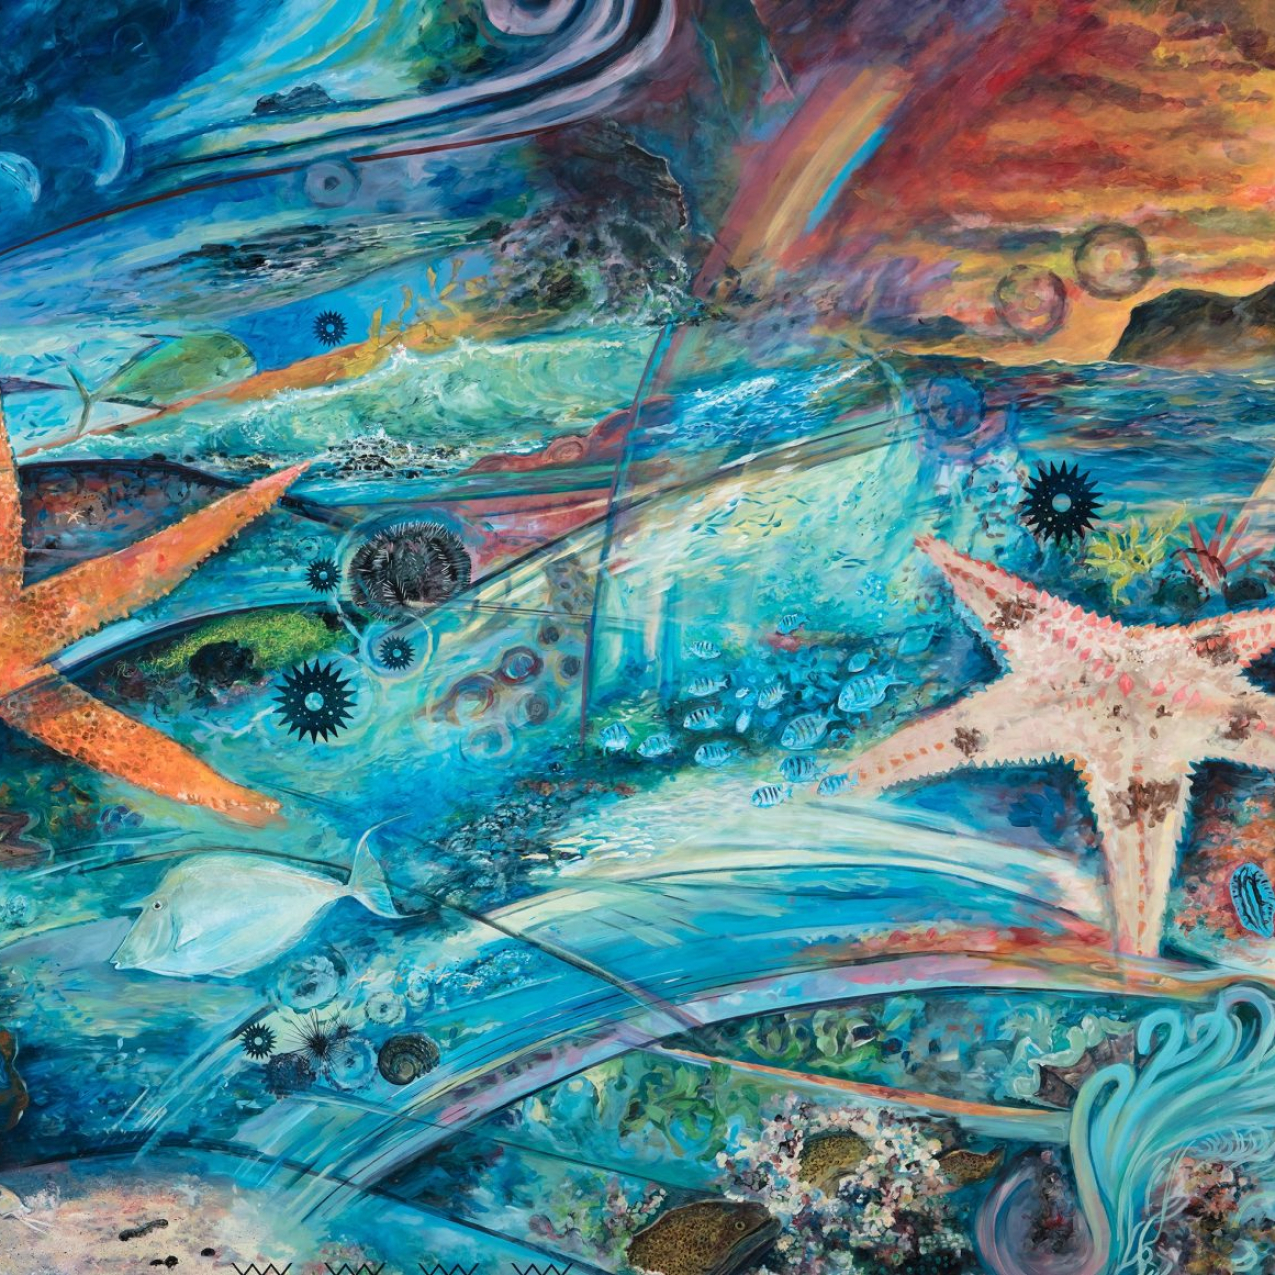 The Kumulipo, a Hawaiian creation story is depicted in this mural by Kahi Ching and prominently displayed at the Mokupāpapa Discovery Center.​ Sea stars, fish, and an octopus are seen in ocean waves and a sunset in the background.